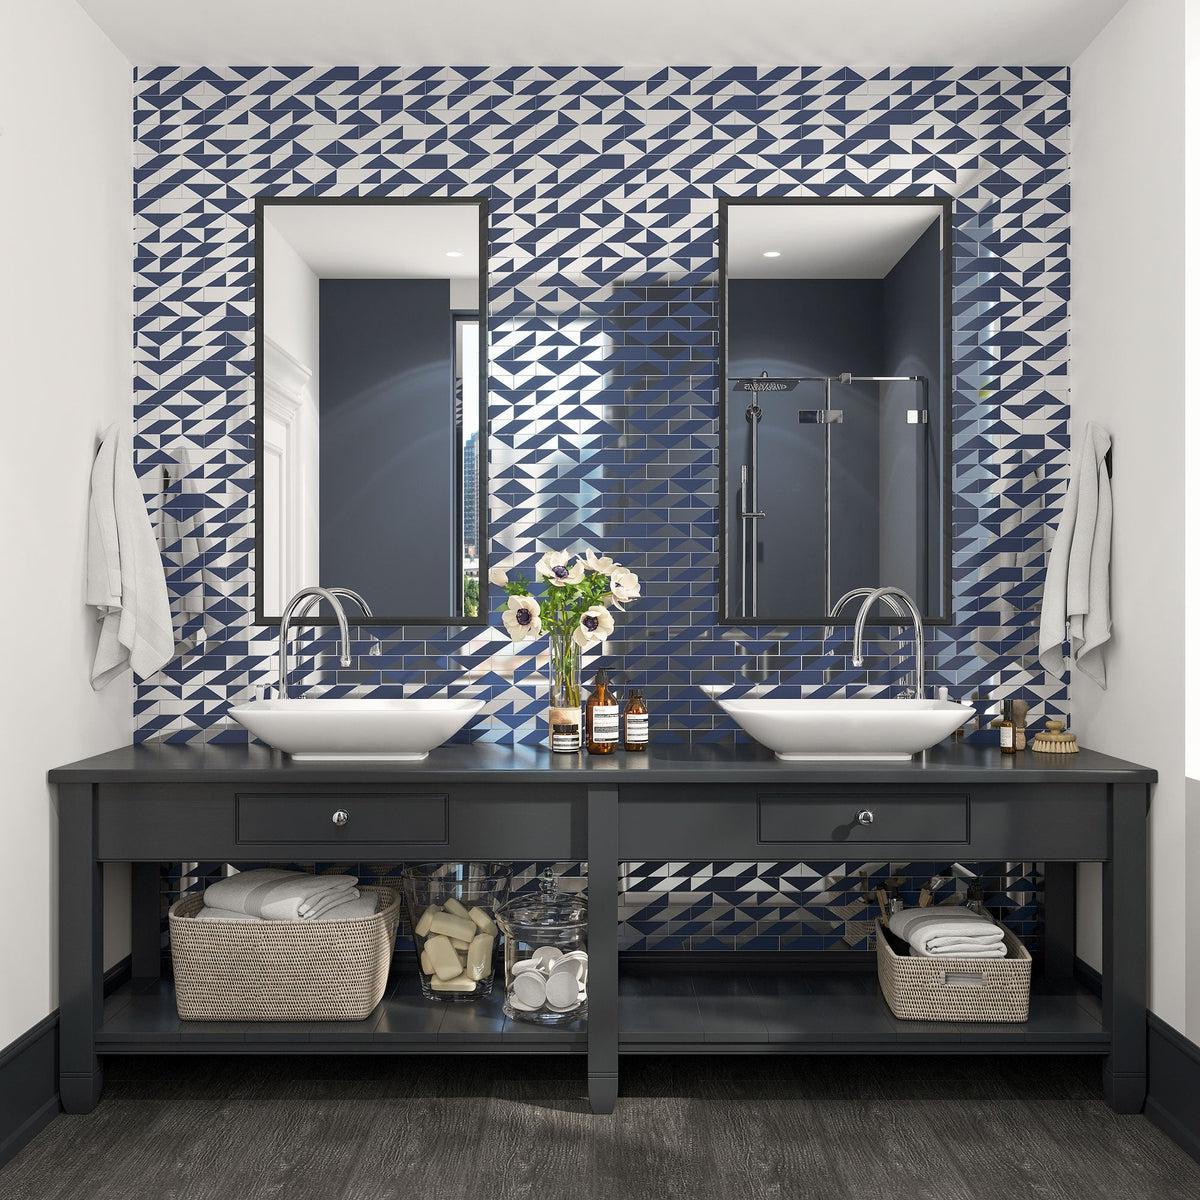 Geometric blue glass subway tile in contemporary bathroom